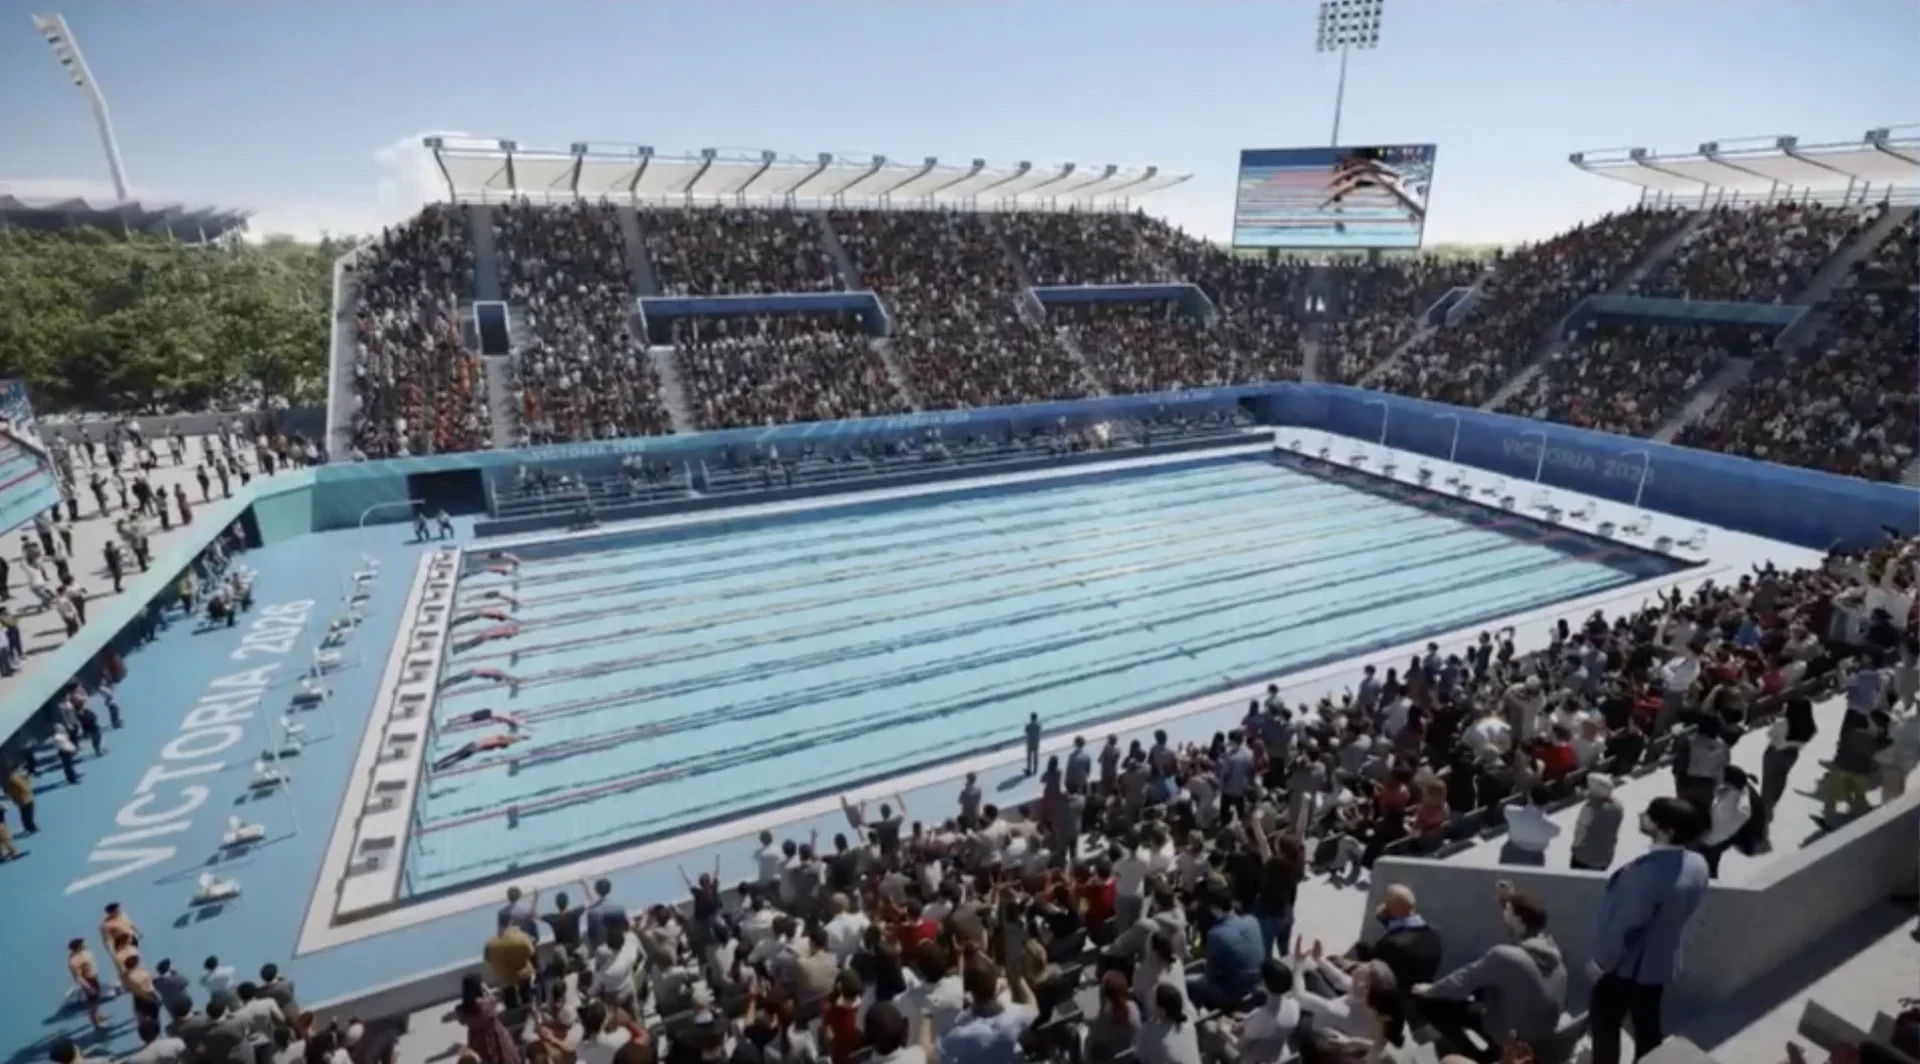 Geelong will host the swimming during the 2026 Commonwealth Games in Victoria ©Victoria 2026